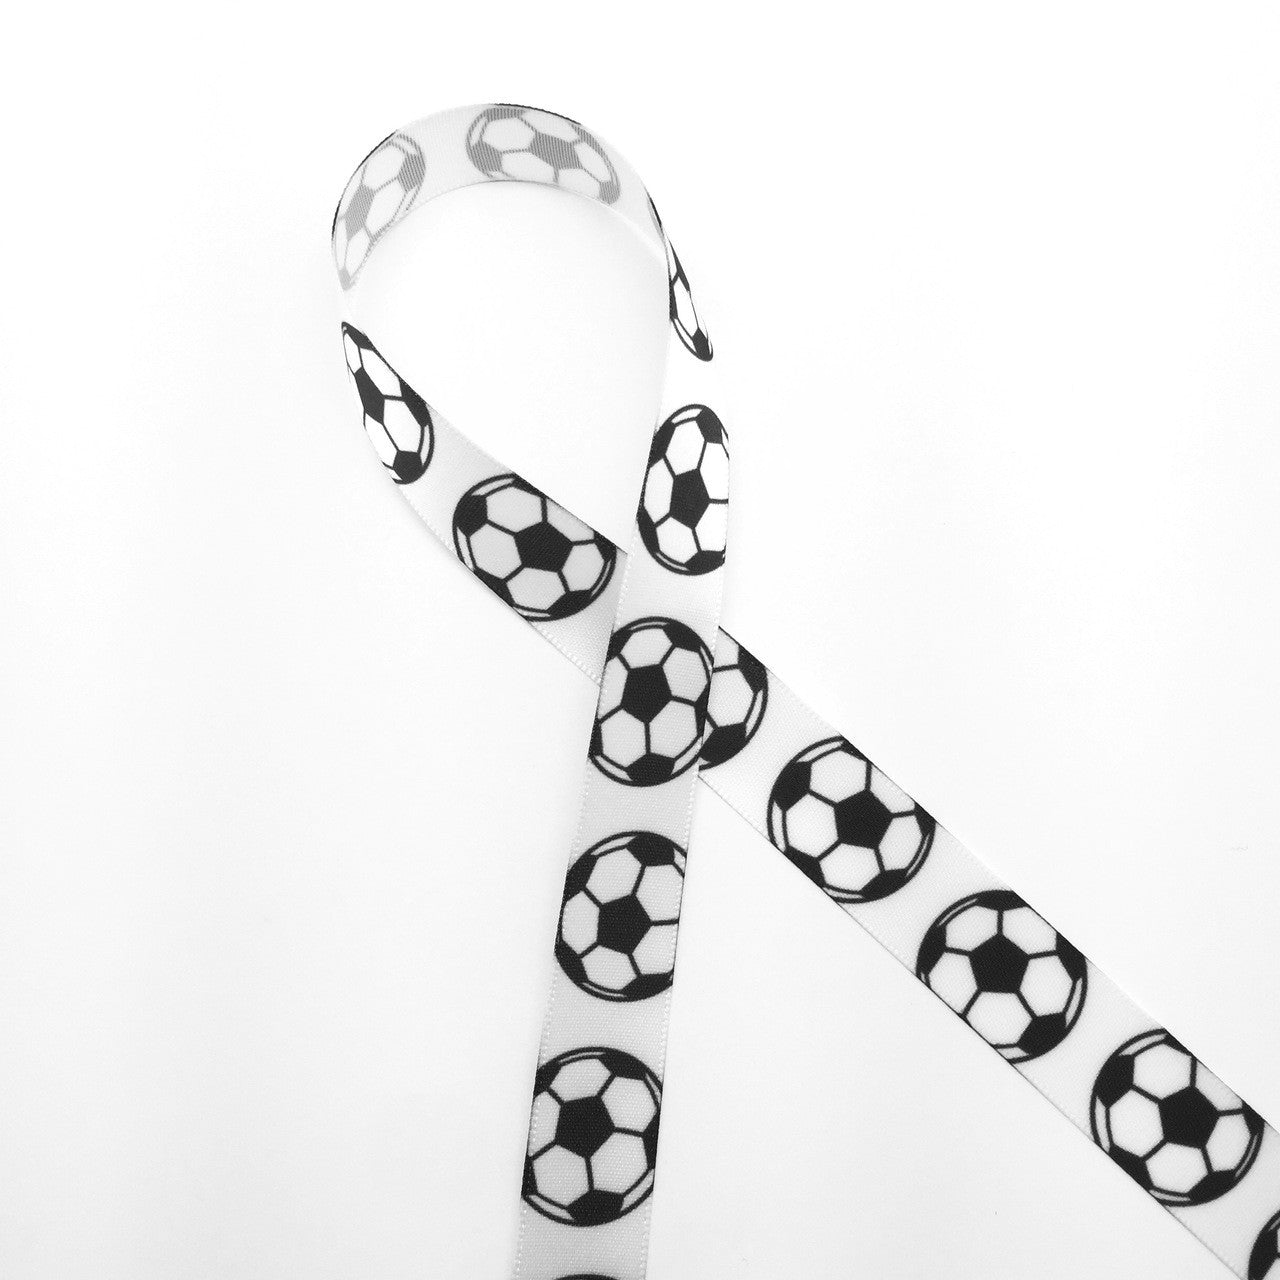 Soccer balls lined up along our 5/8" white single face satin ribbon. The ideal addition to a soccer themed party!